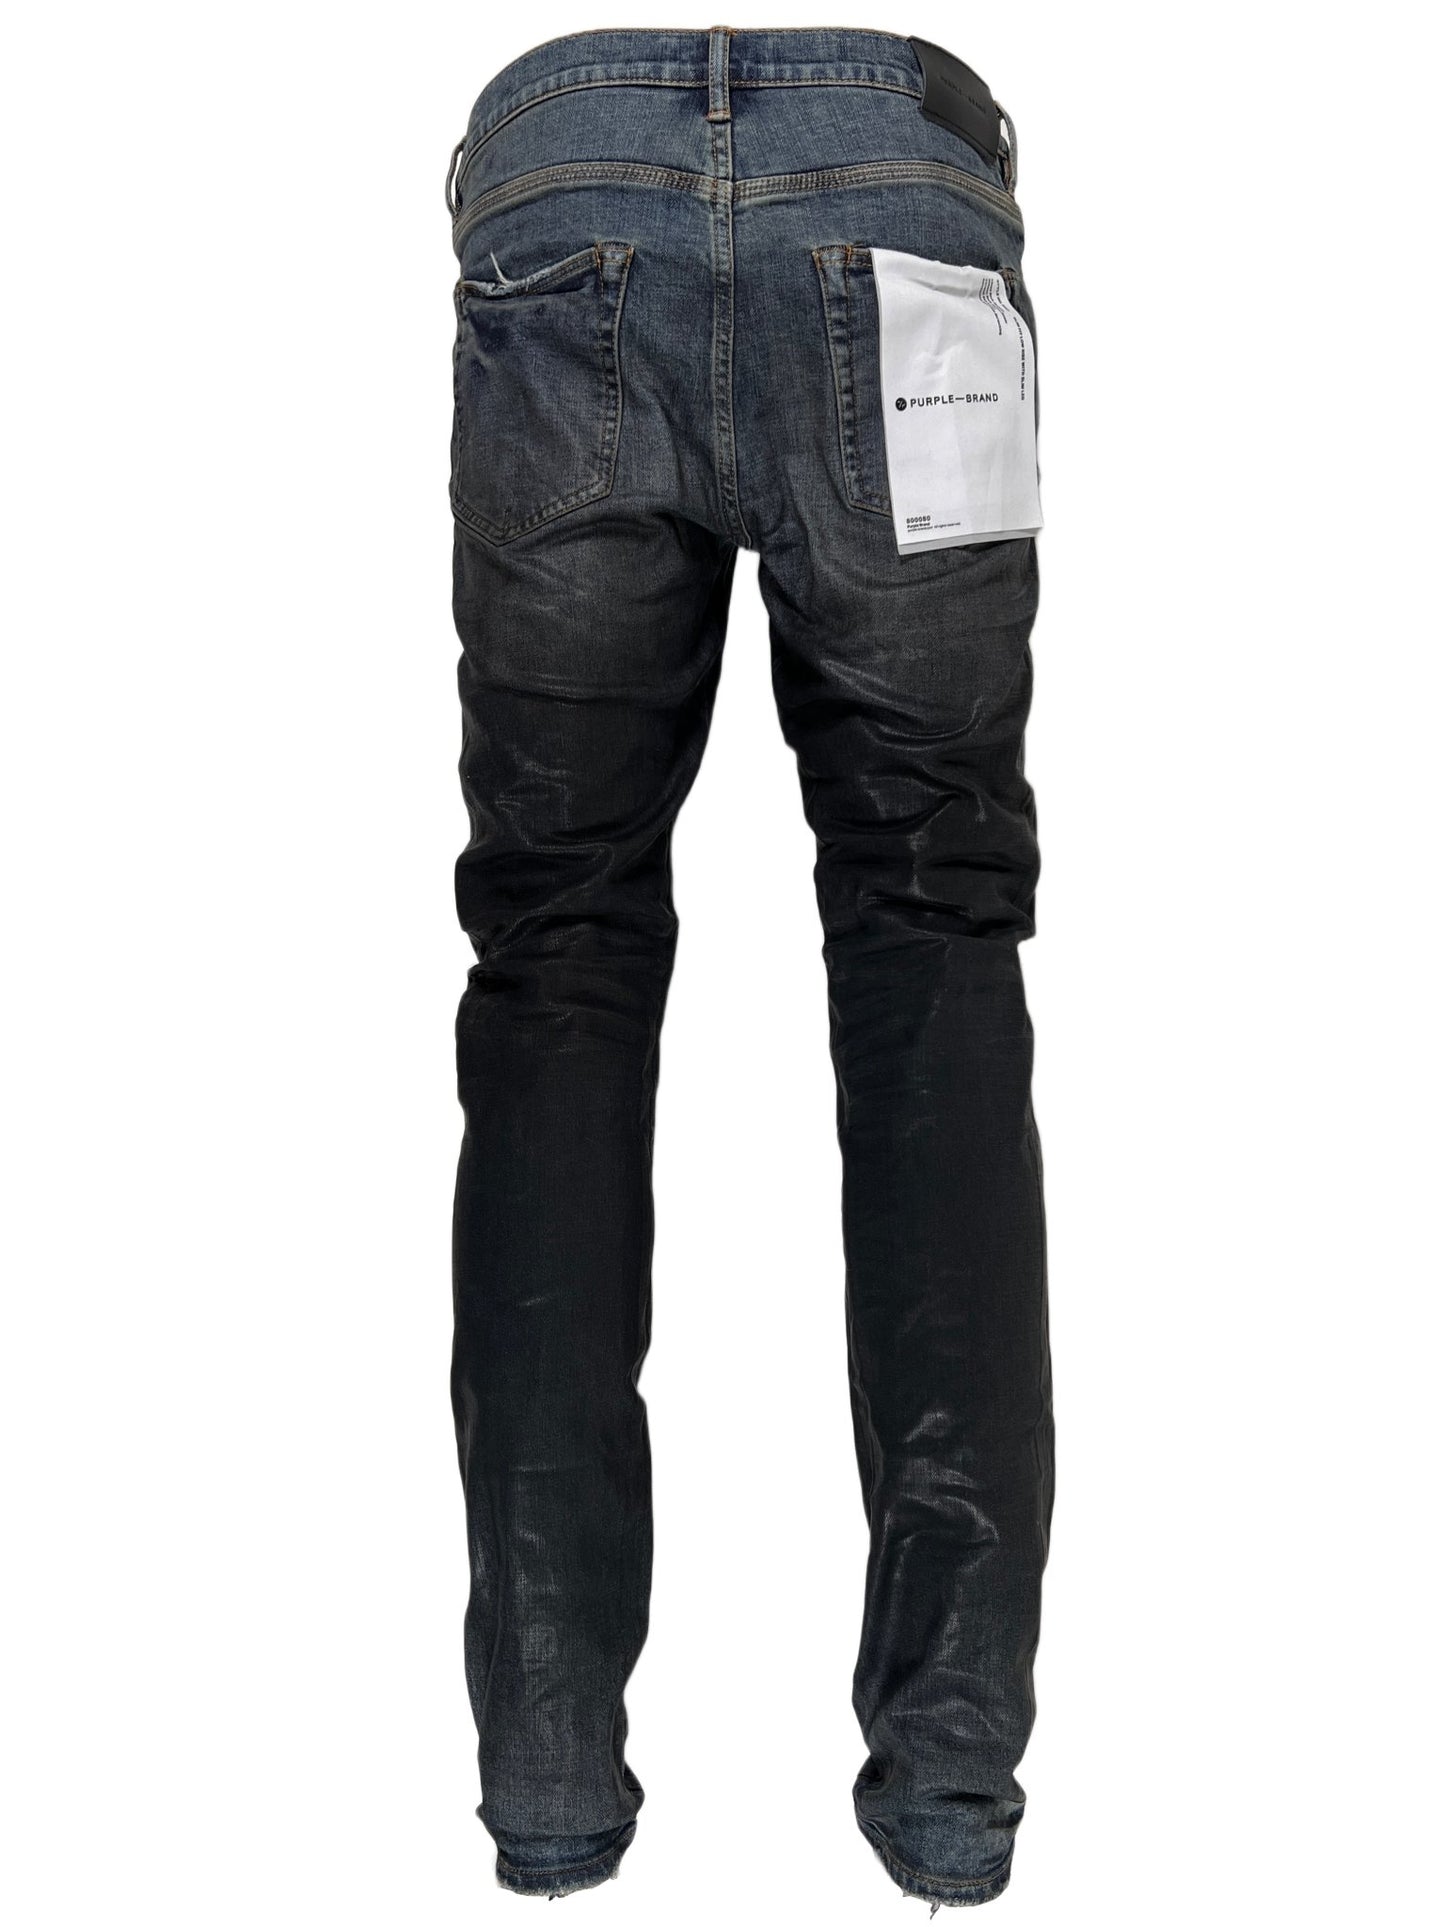 The back view of a pair of PURPLE BRAND JEANS P001-IBCG MID INDIGO BLACK COATED GRADIENT jeans.